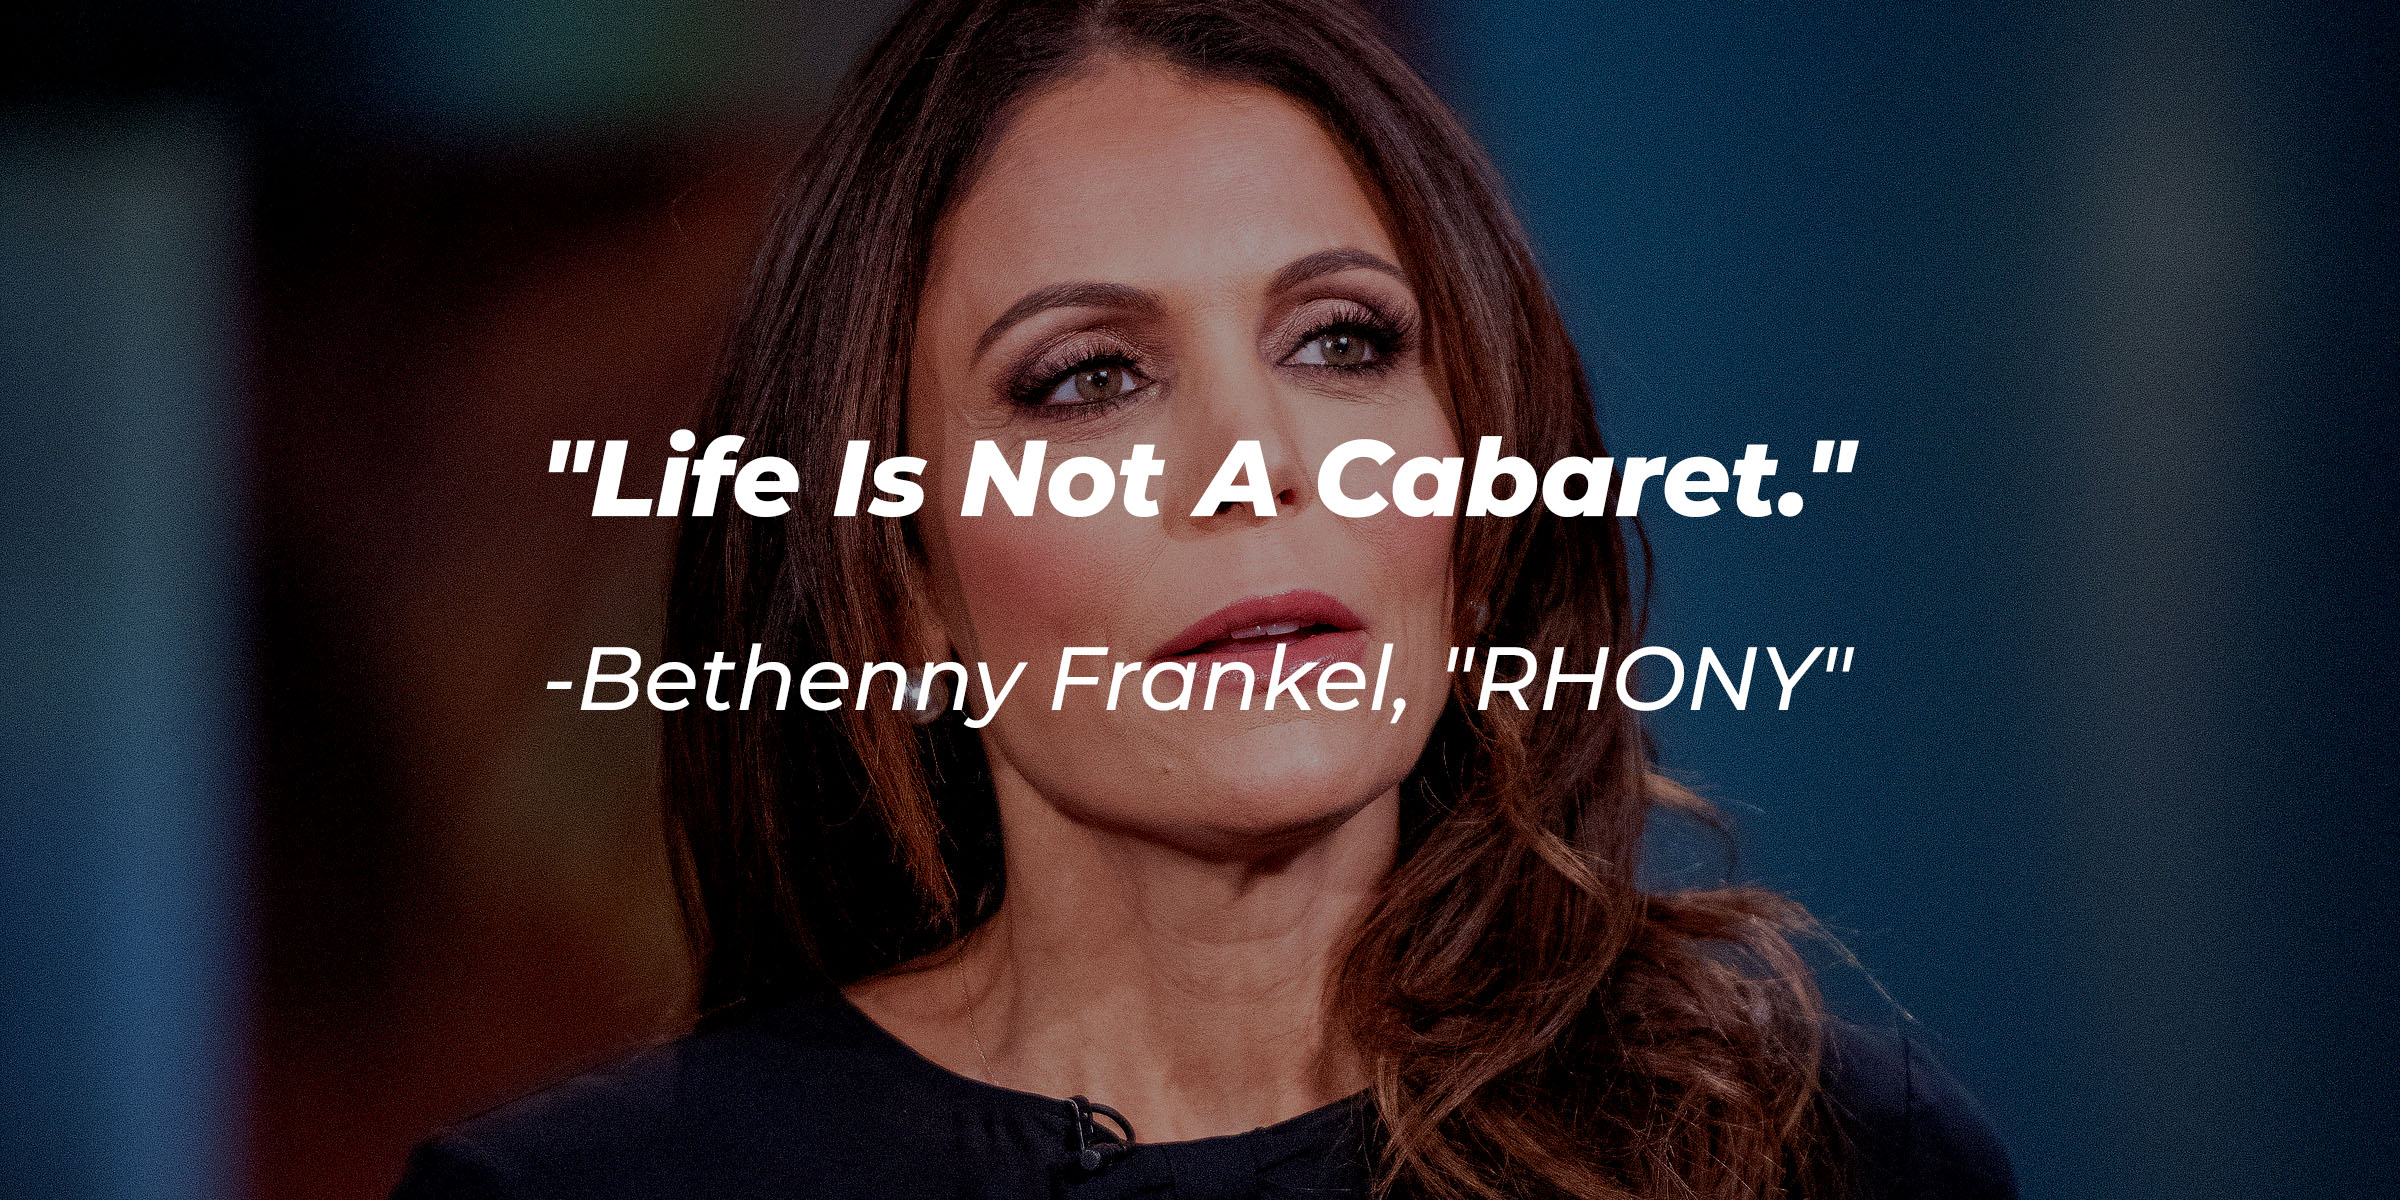 Bethenny Frankel's quote: "Life Is Not a Cabaret" | Source: Getty Images